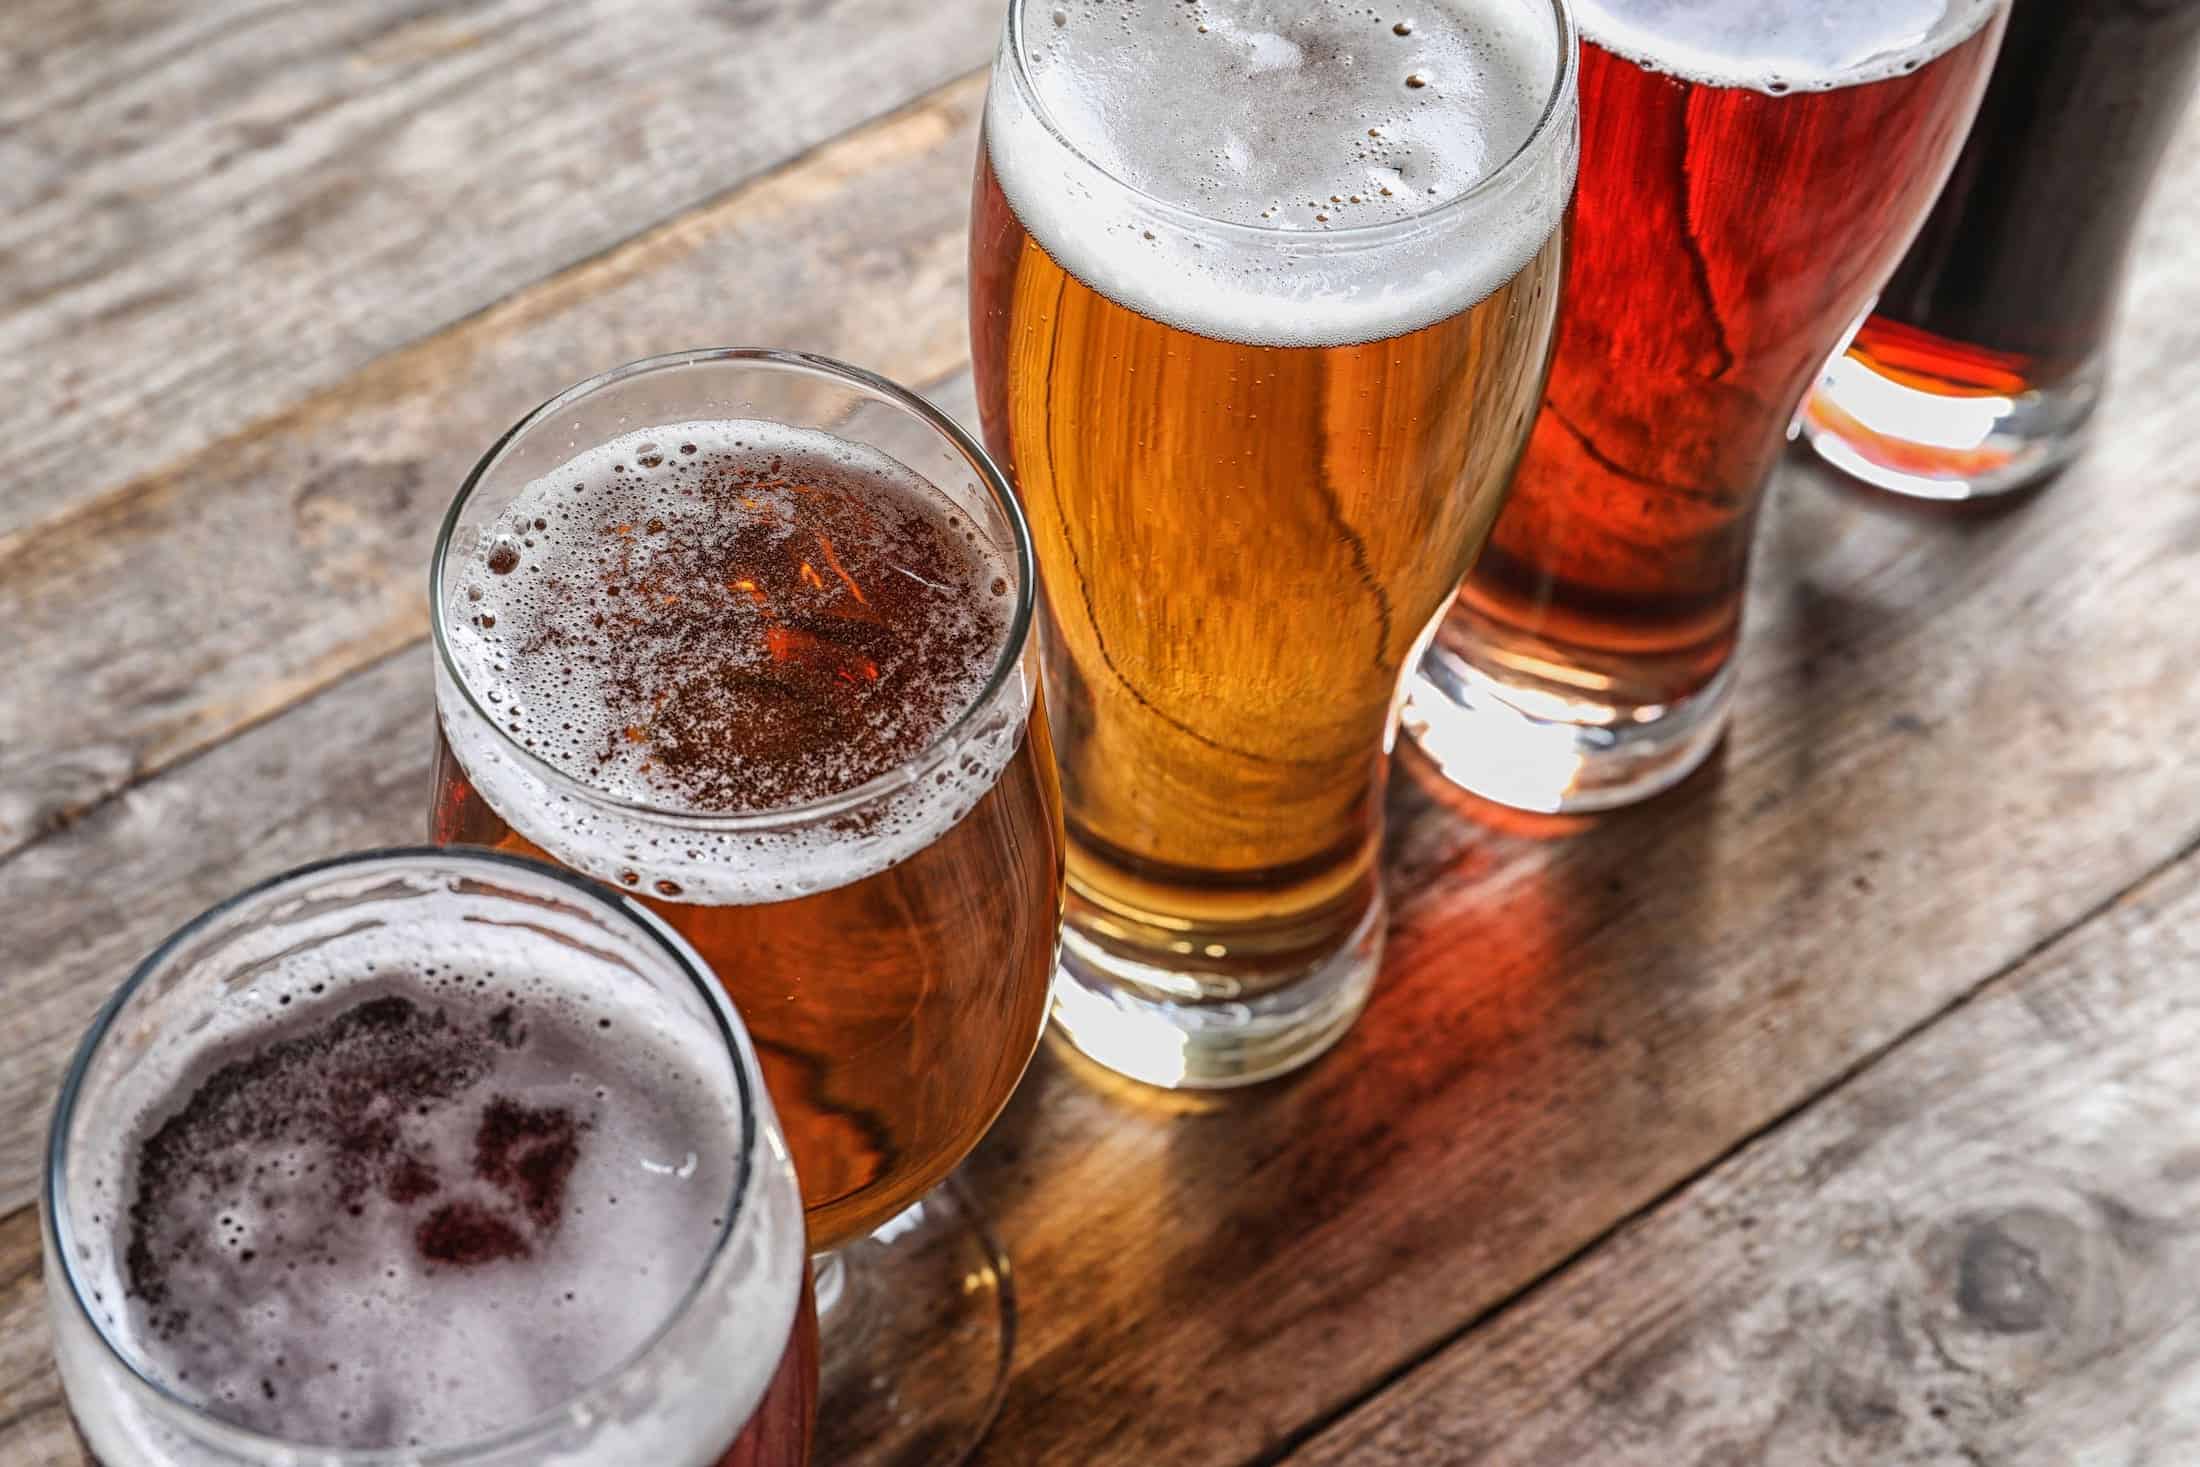 Drinker fined £1,000 for going to pub less than half an hour after being told to self-isolate